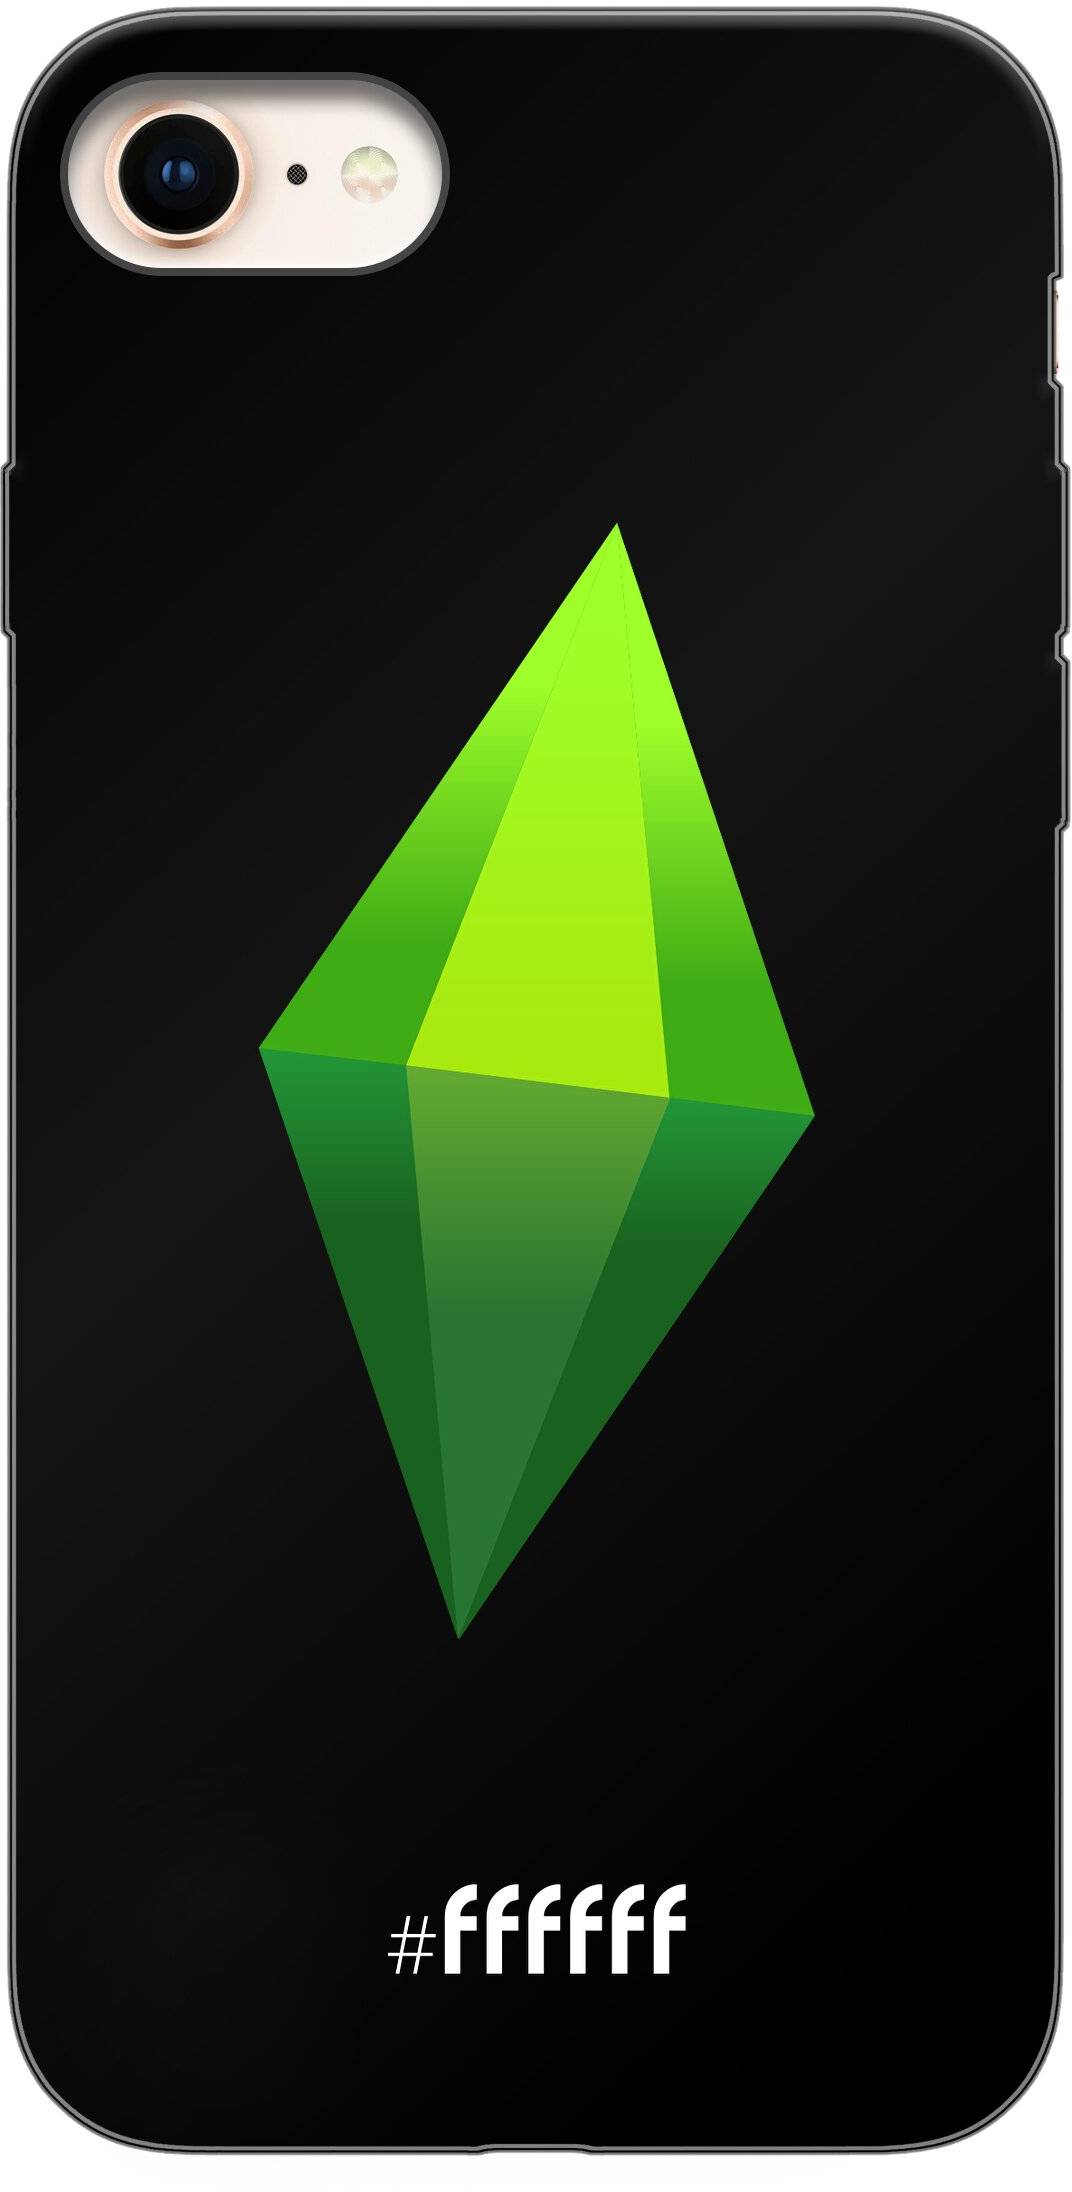 The Sims iPhone 7